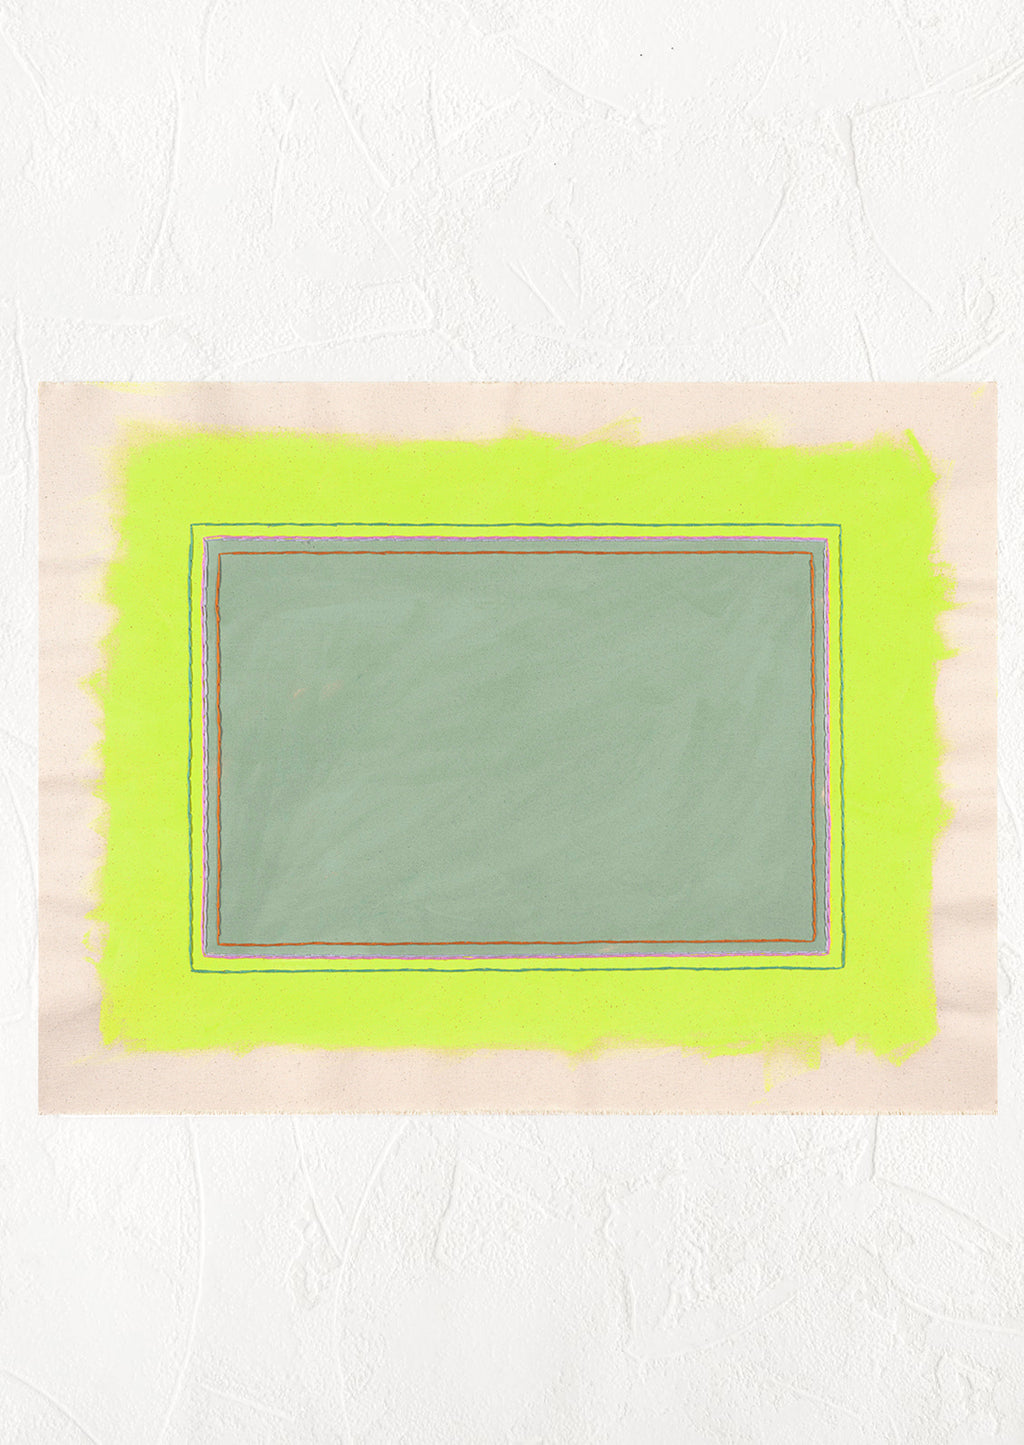 1: Digital reproduction of canvas painting featuring neon yellow and sage painted rectangles with embroidery detail.